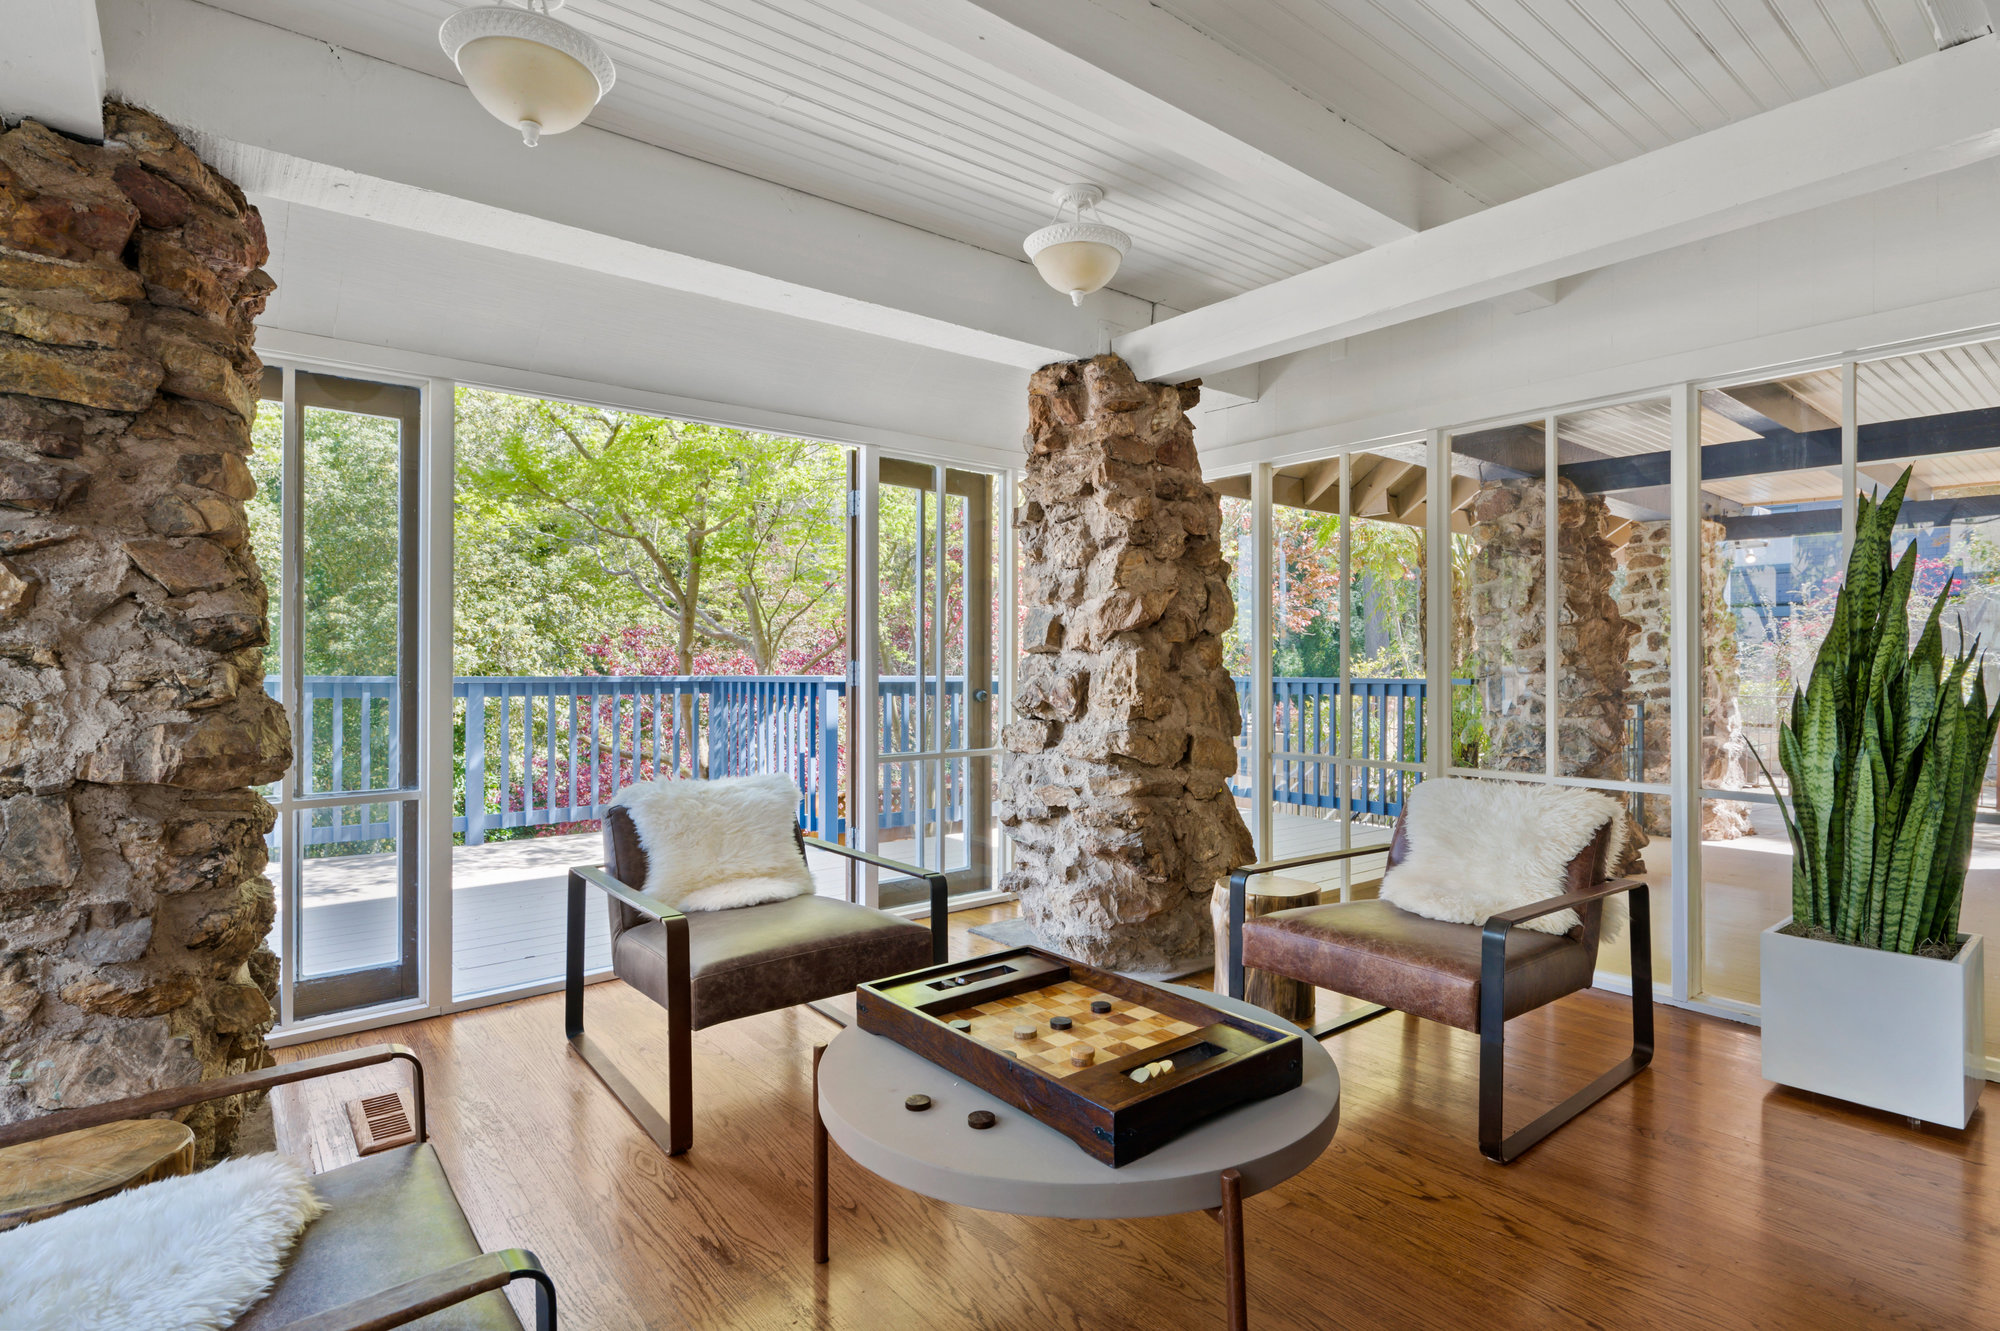 Property Photo: Sitting area that is surrounded by glass windows. 